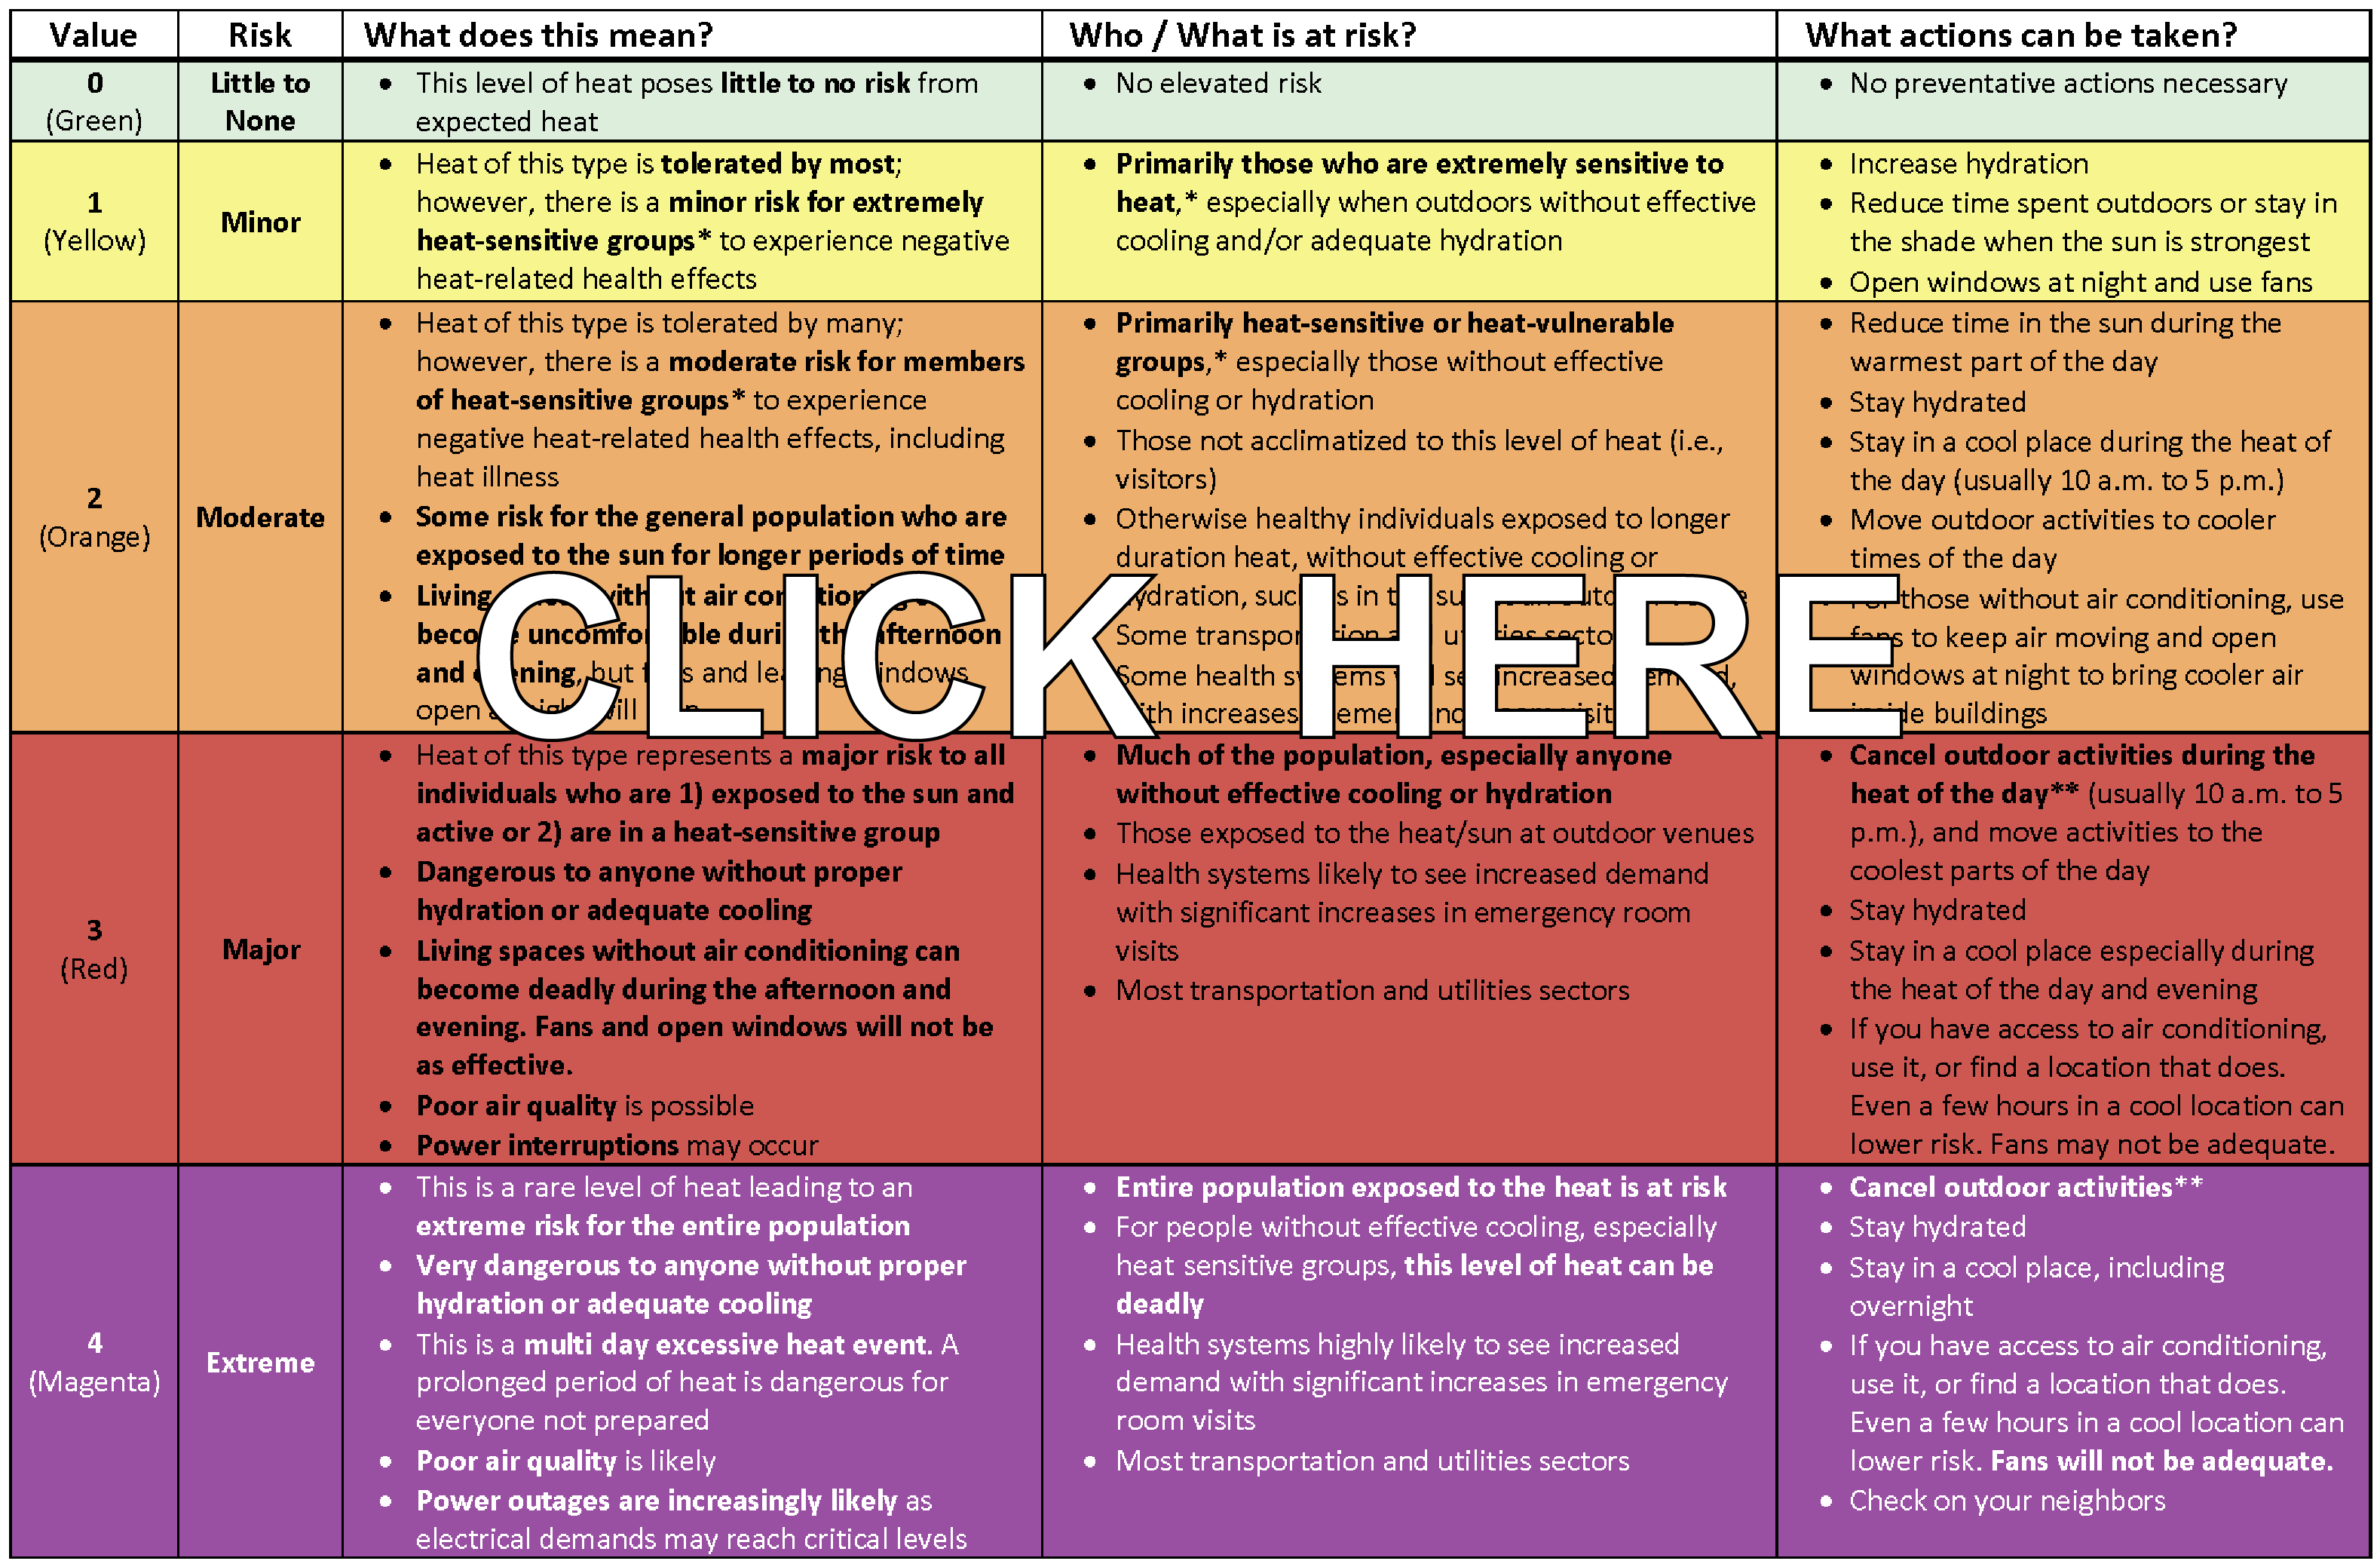 CDPH Heat Risk Grid (adapted from NWS HeatRisk tool)